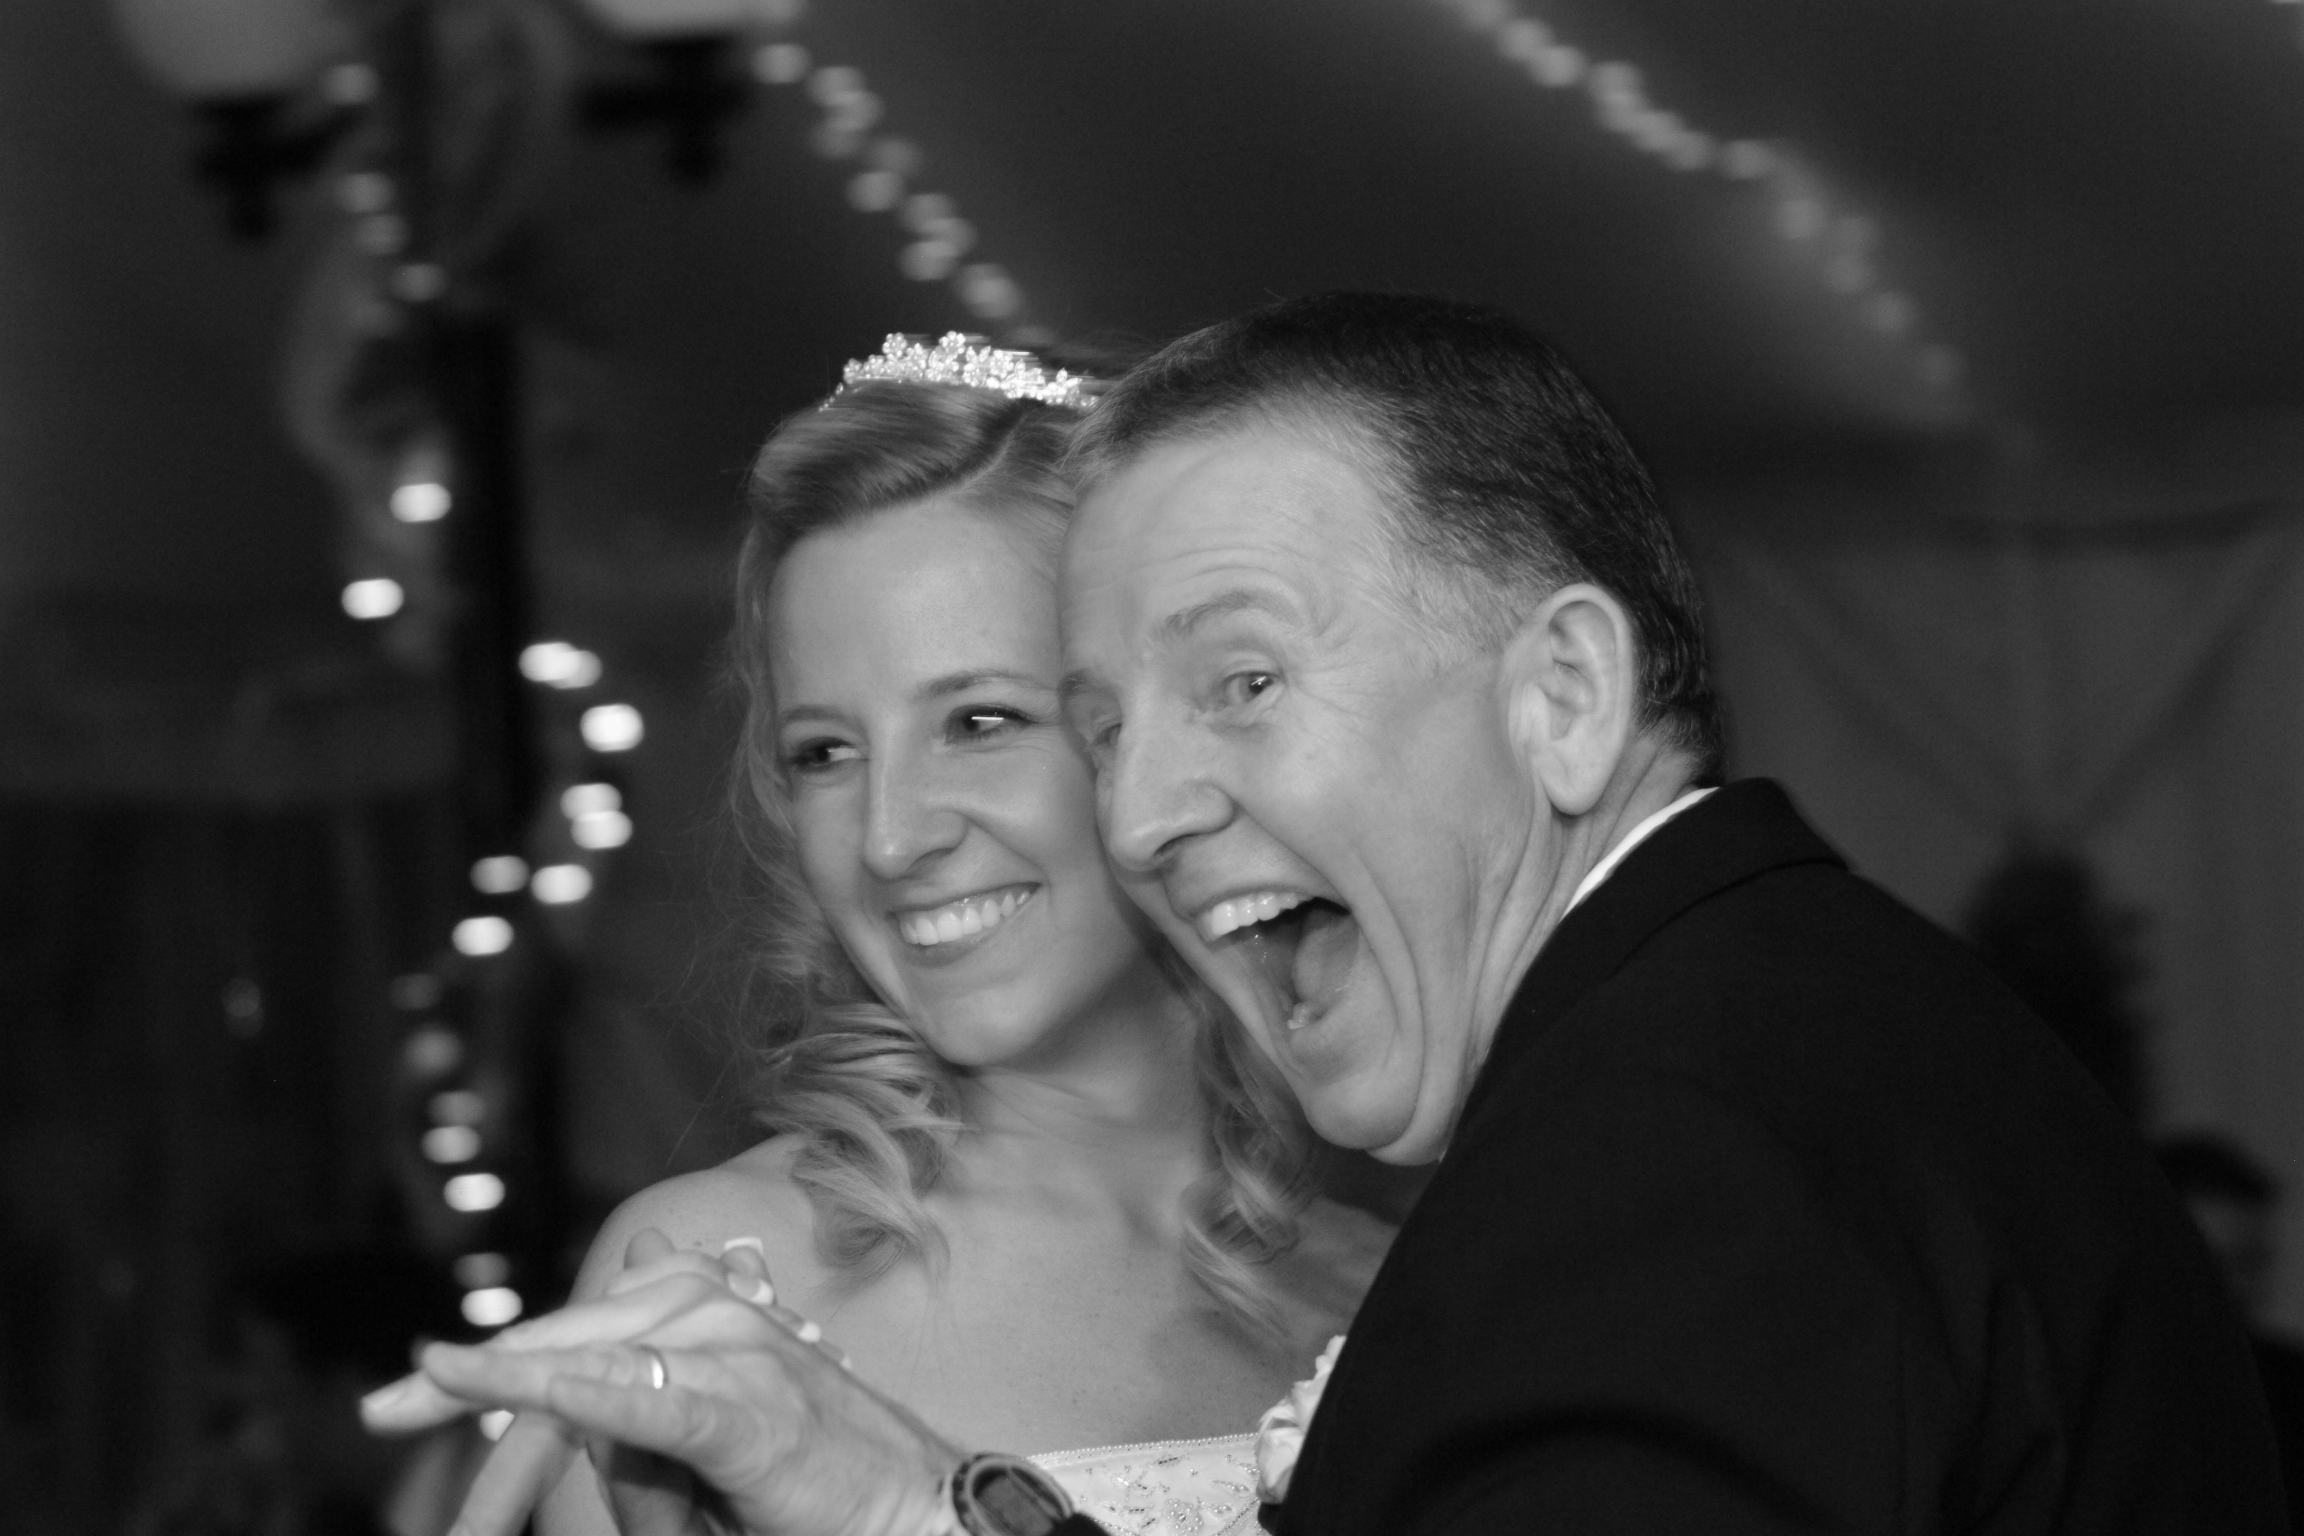 Christine with her dad on her wedding day.